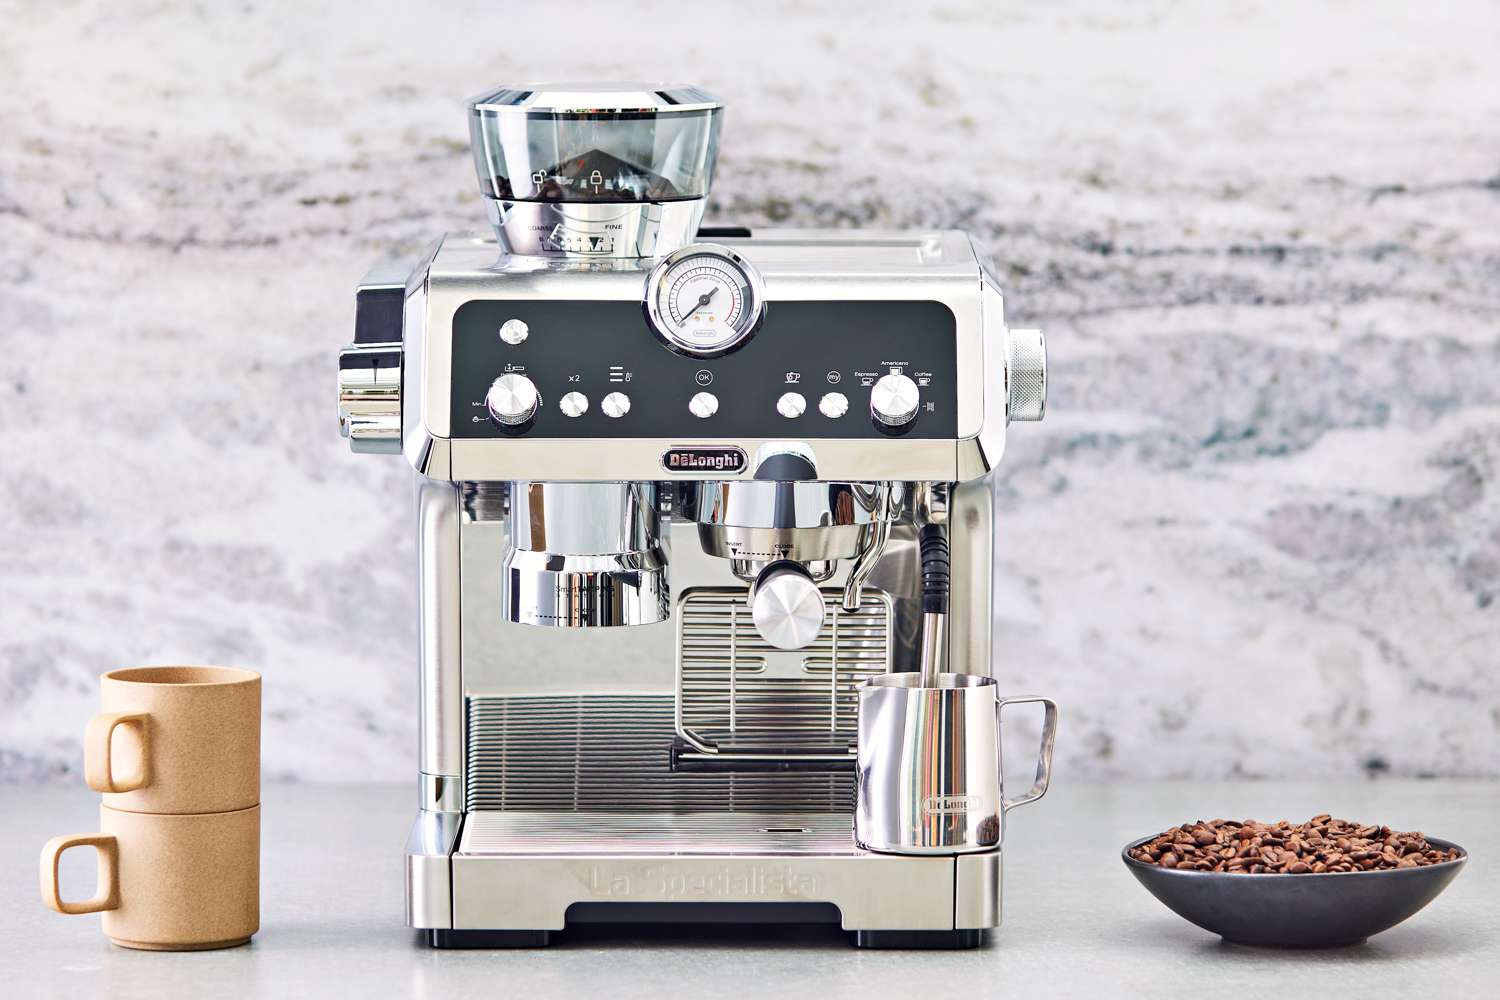 What Coffee To Use In An Espresso Machine